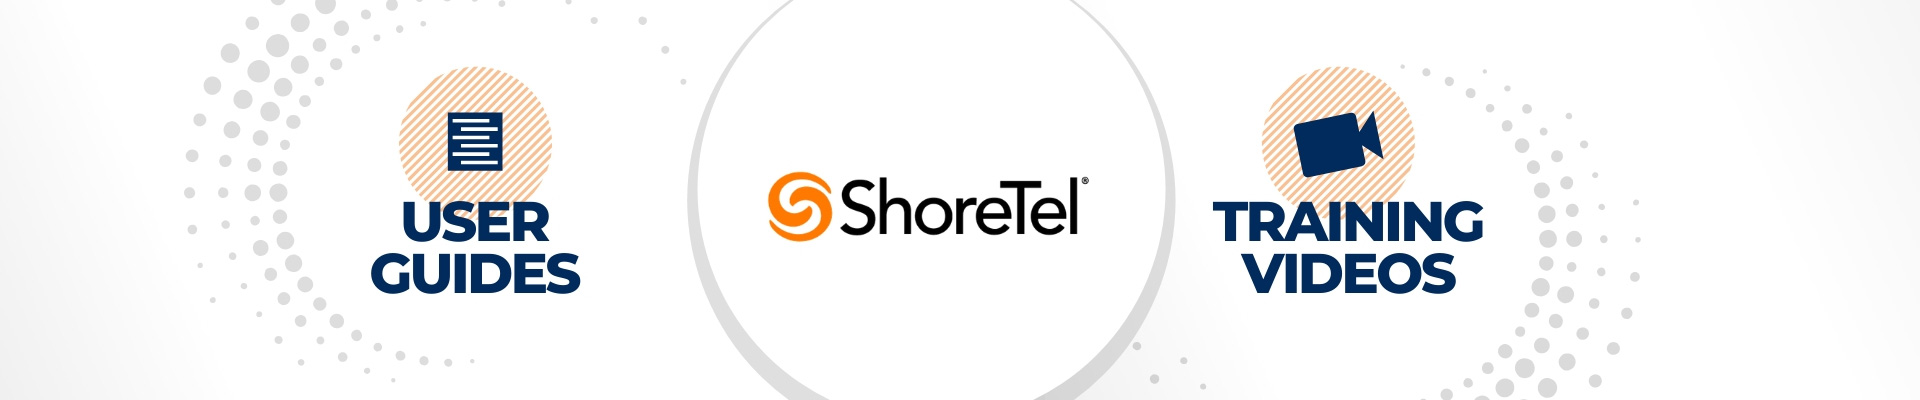 ShoreTel Training Resources and Guides